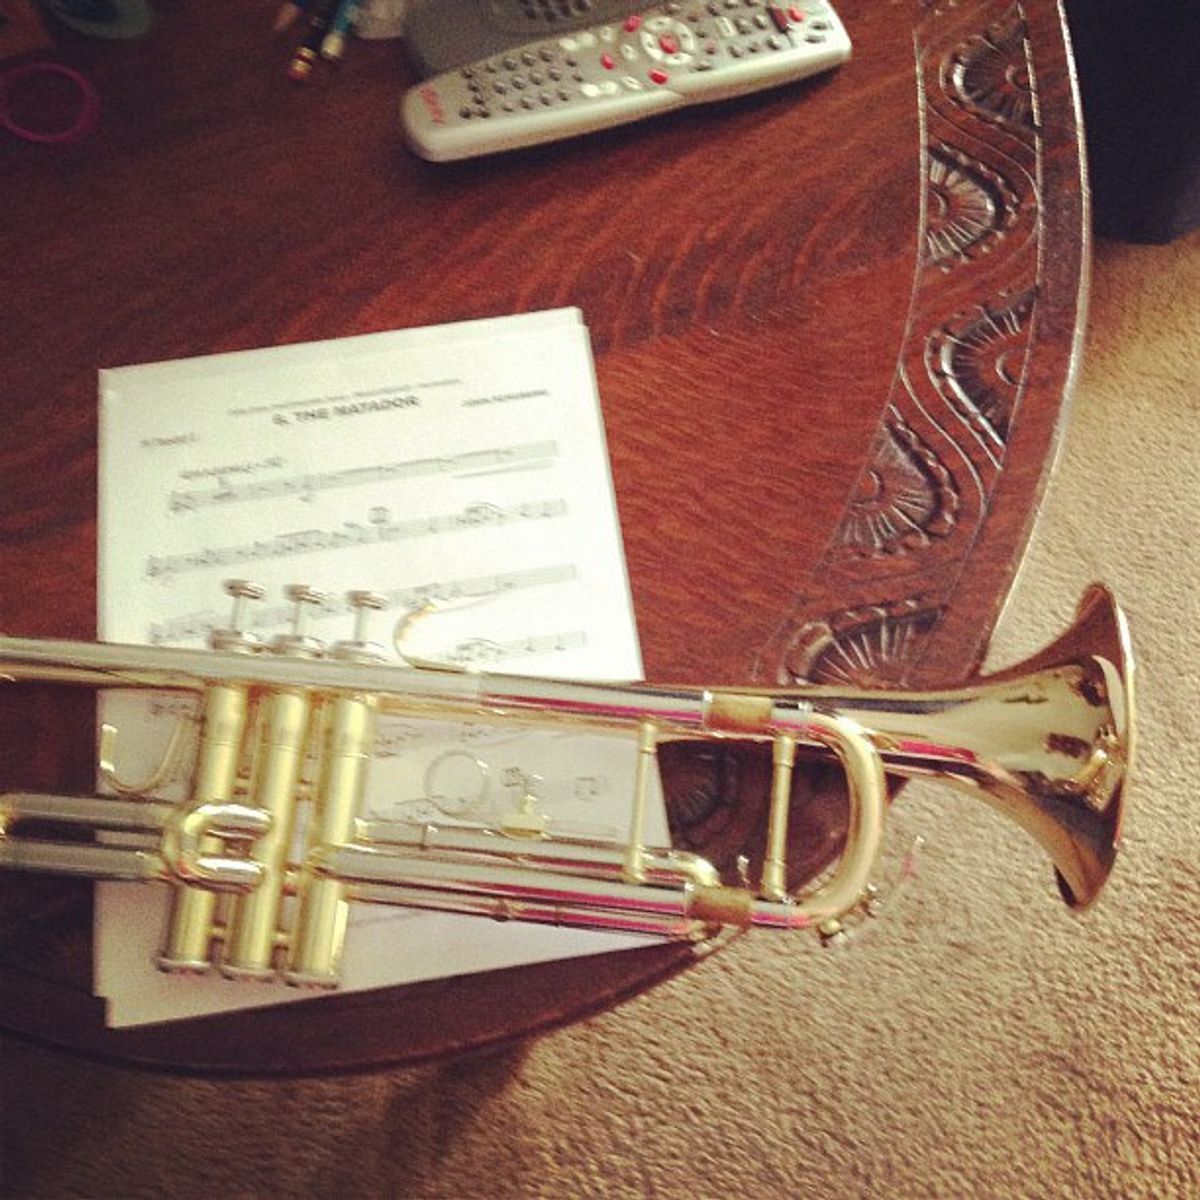 A Farewell To My First Trumpet